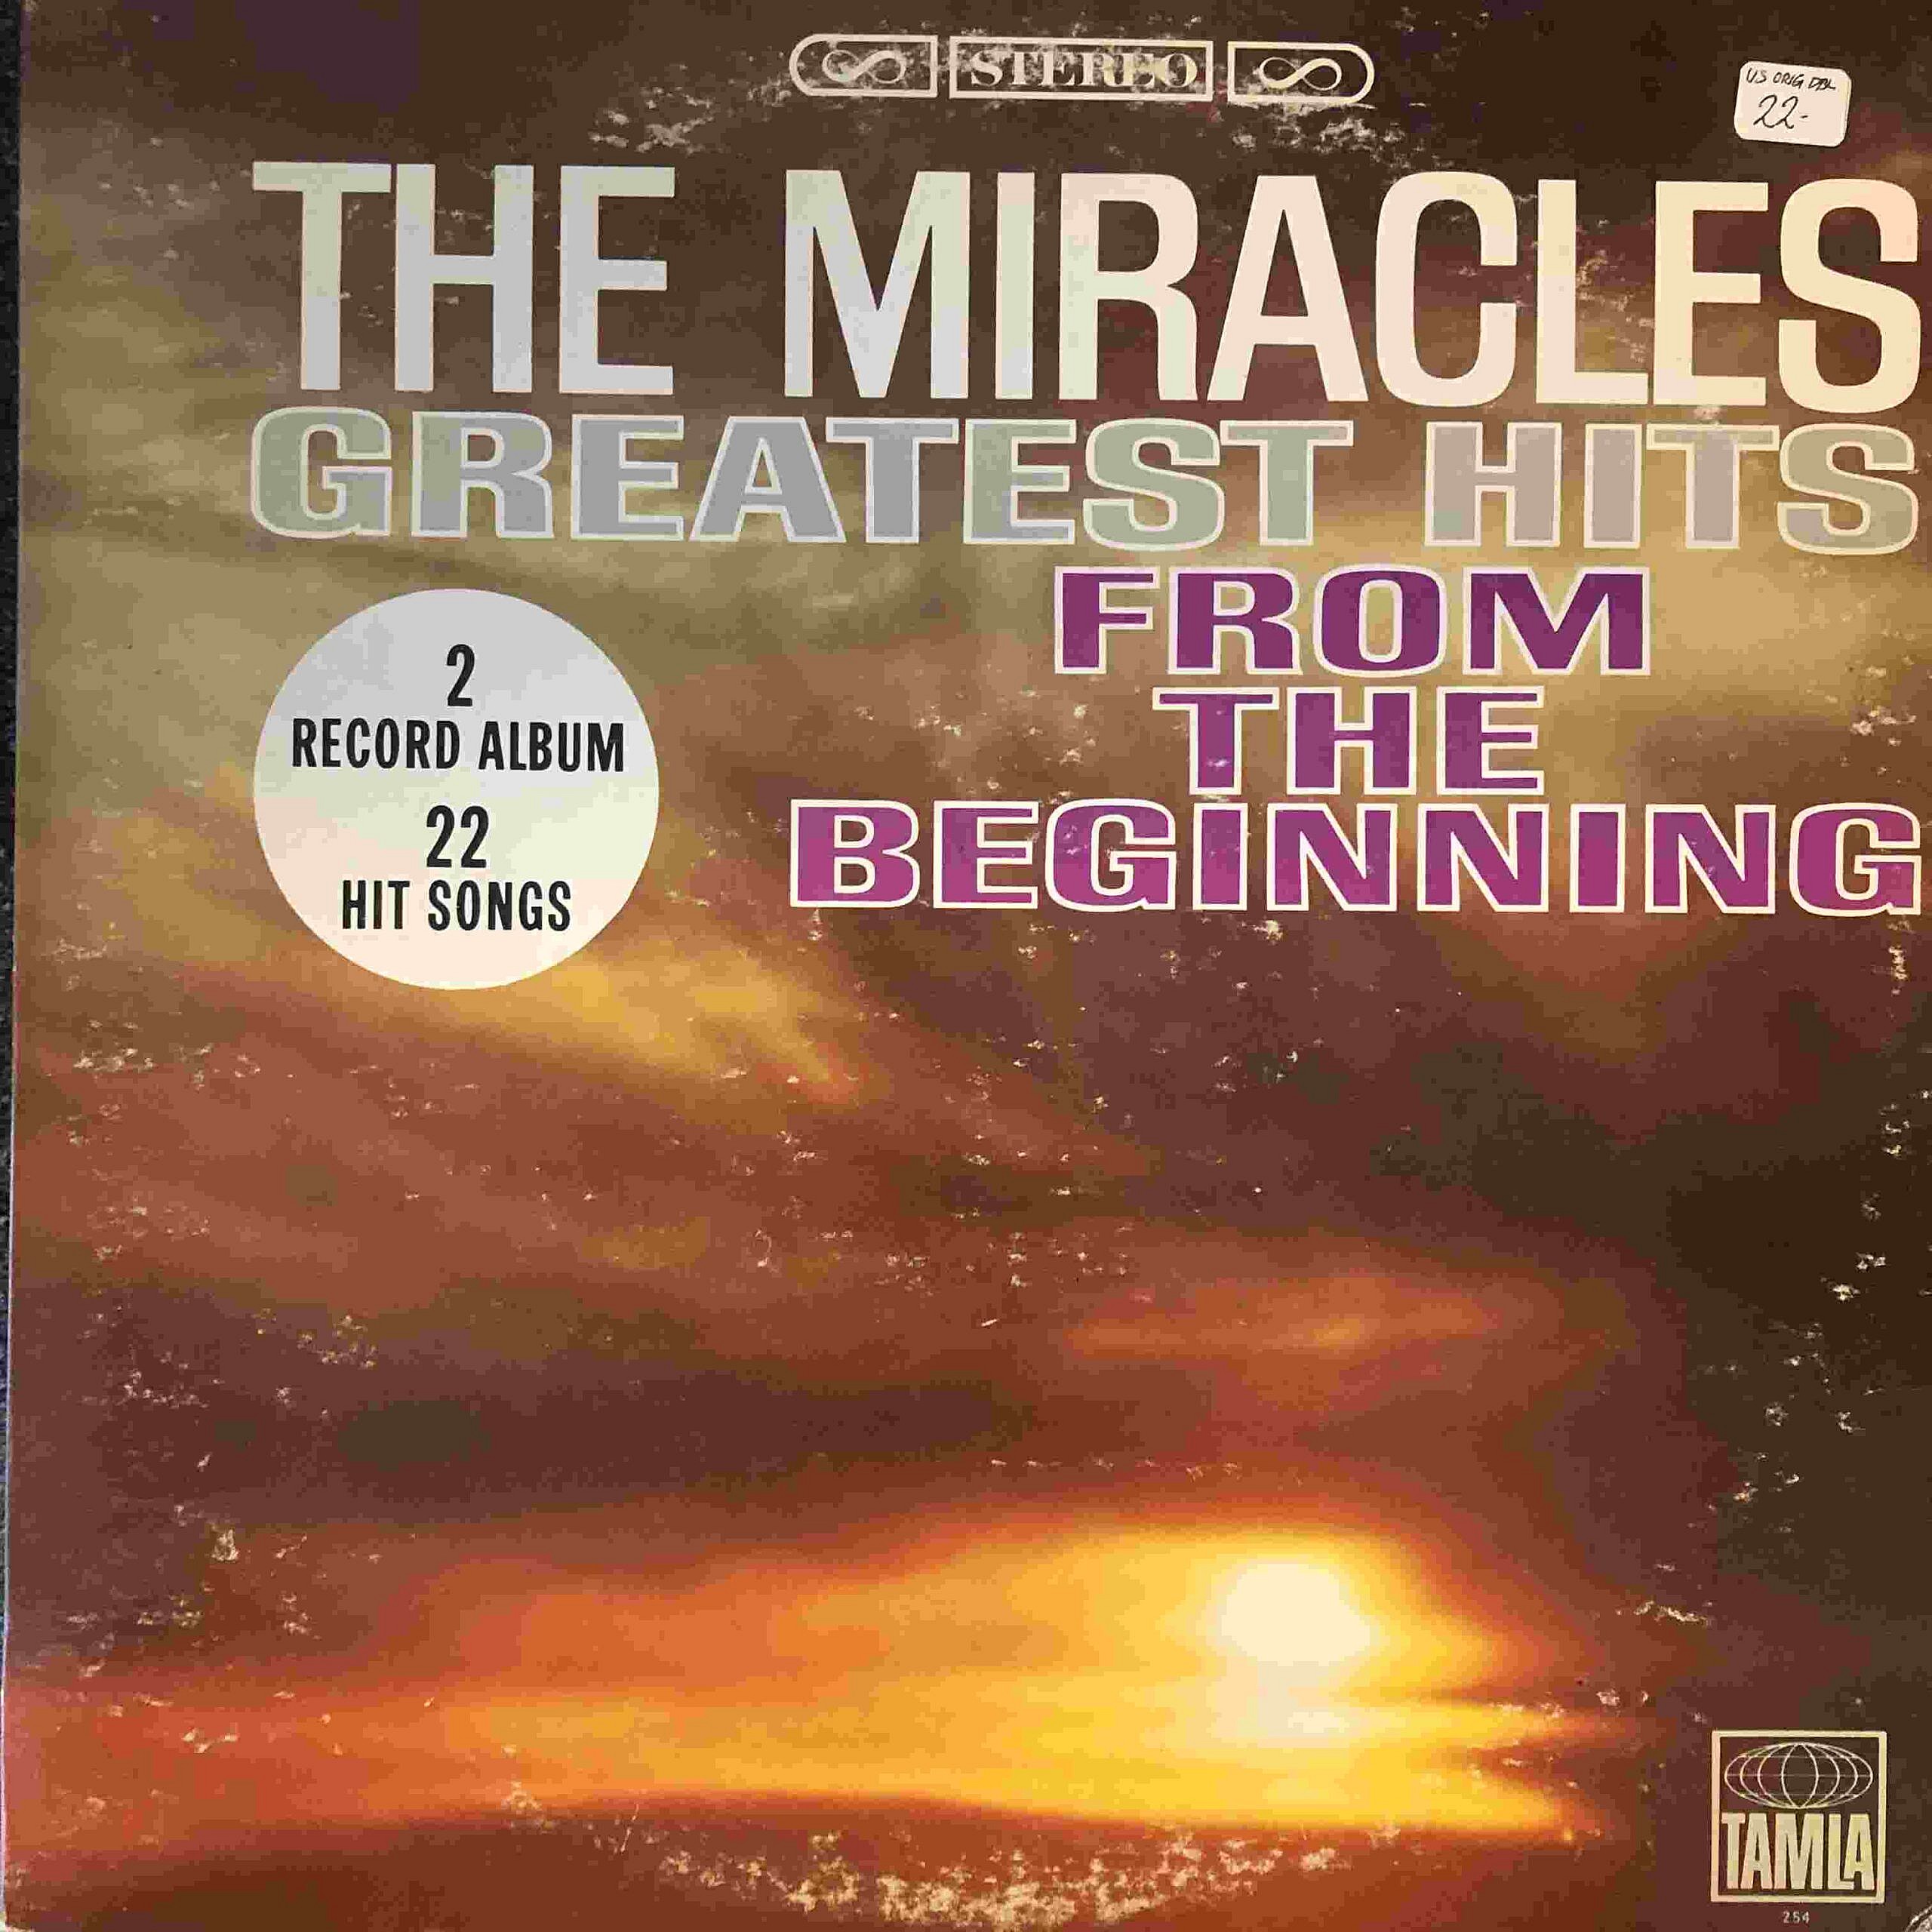 The Miracles Greatest Hits From the Beginning